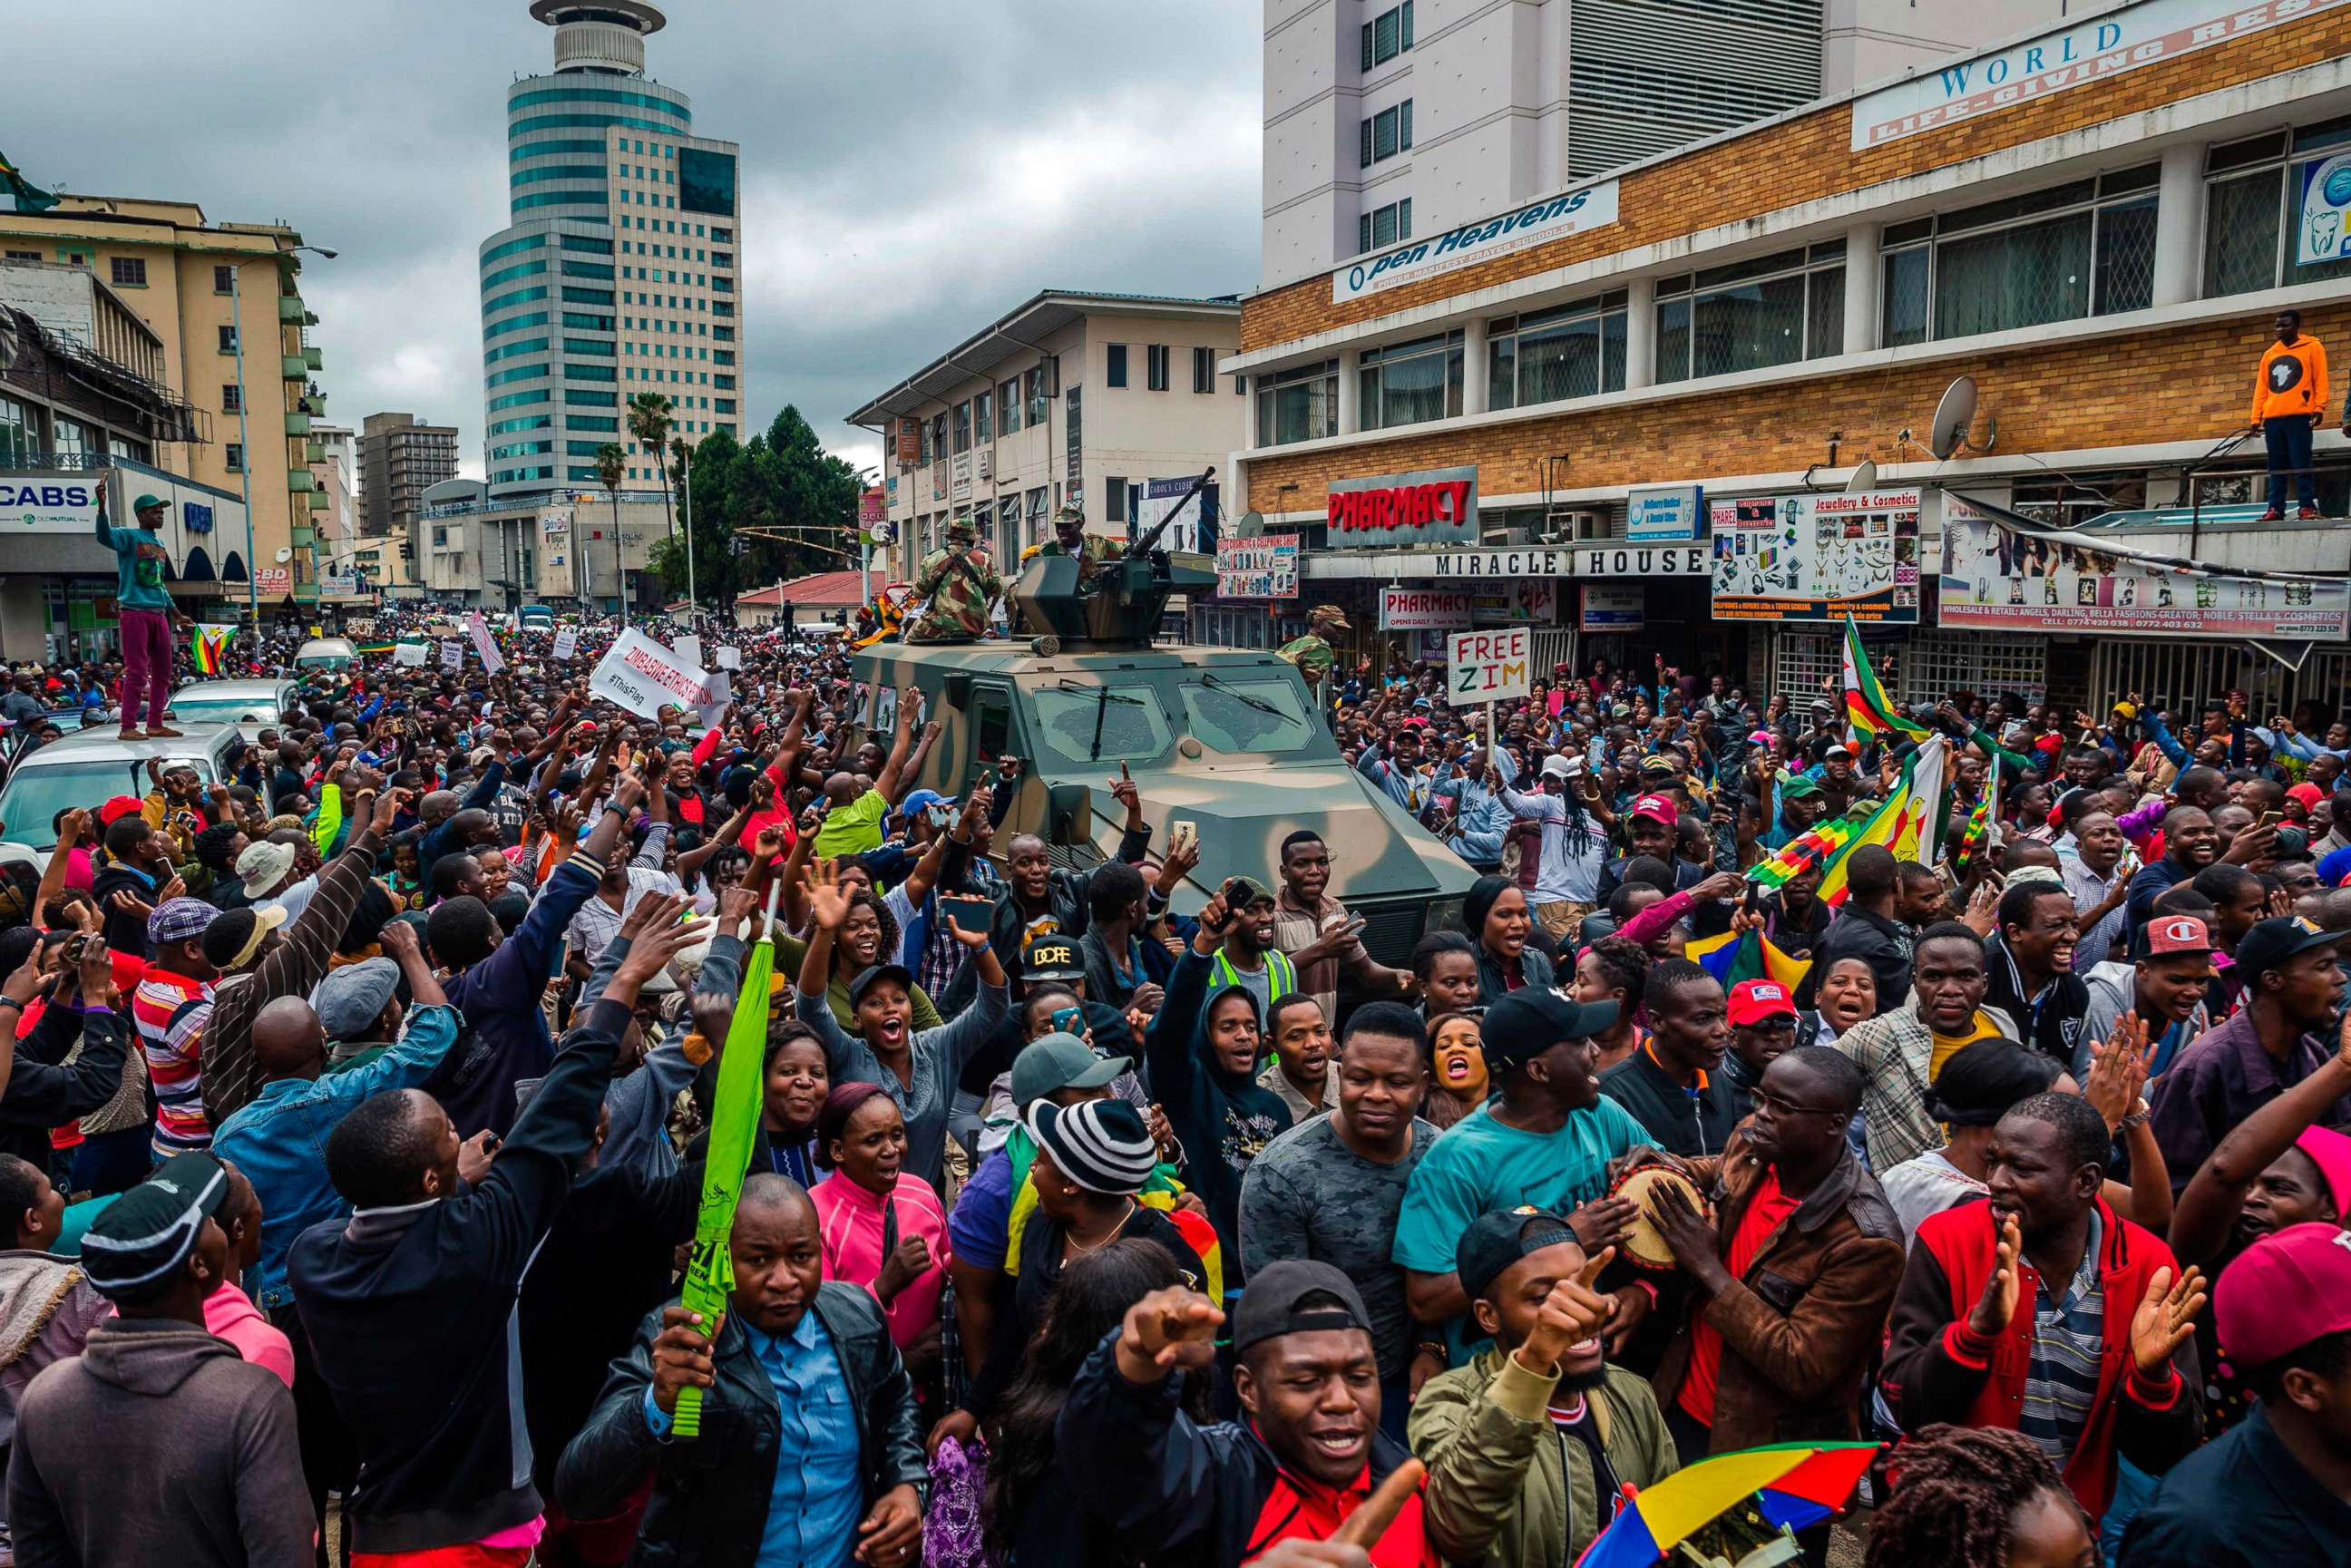 PHOTO: People cheer a passing Zimbabwe Defense Force military vehicle during a demonstration demanding the resignation of President Robert Mugabe, Nov. 18, 2017 in Harare, Zimbabwe.
